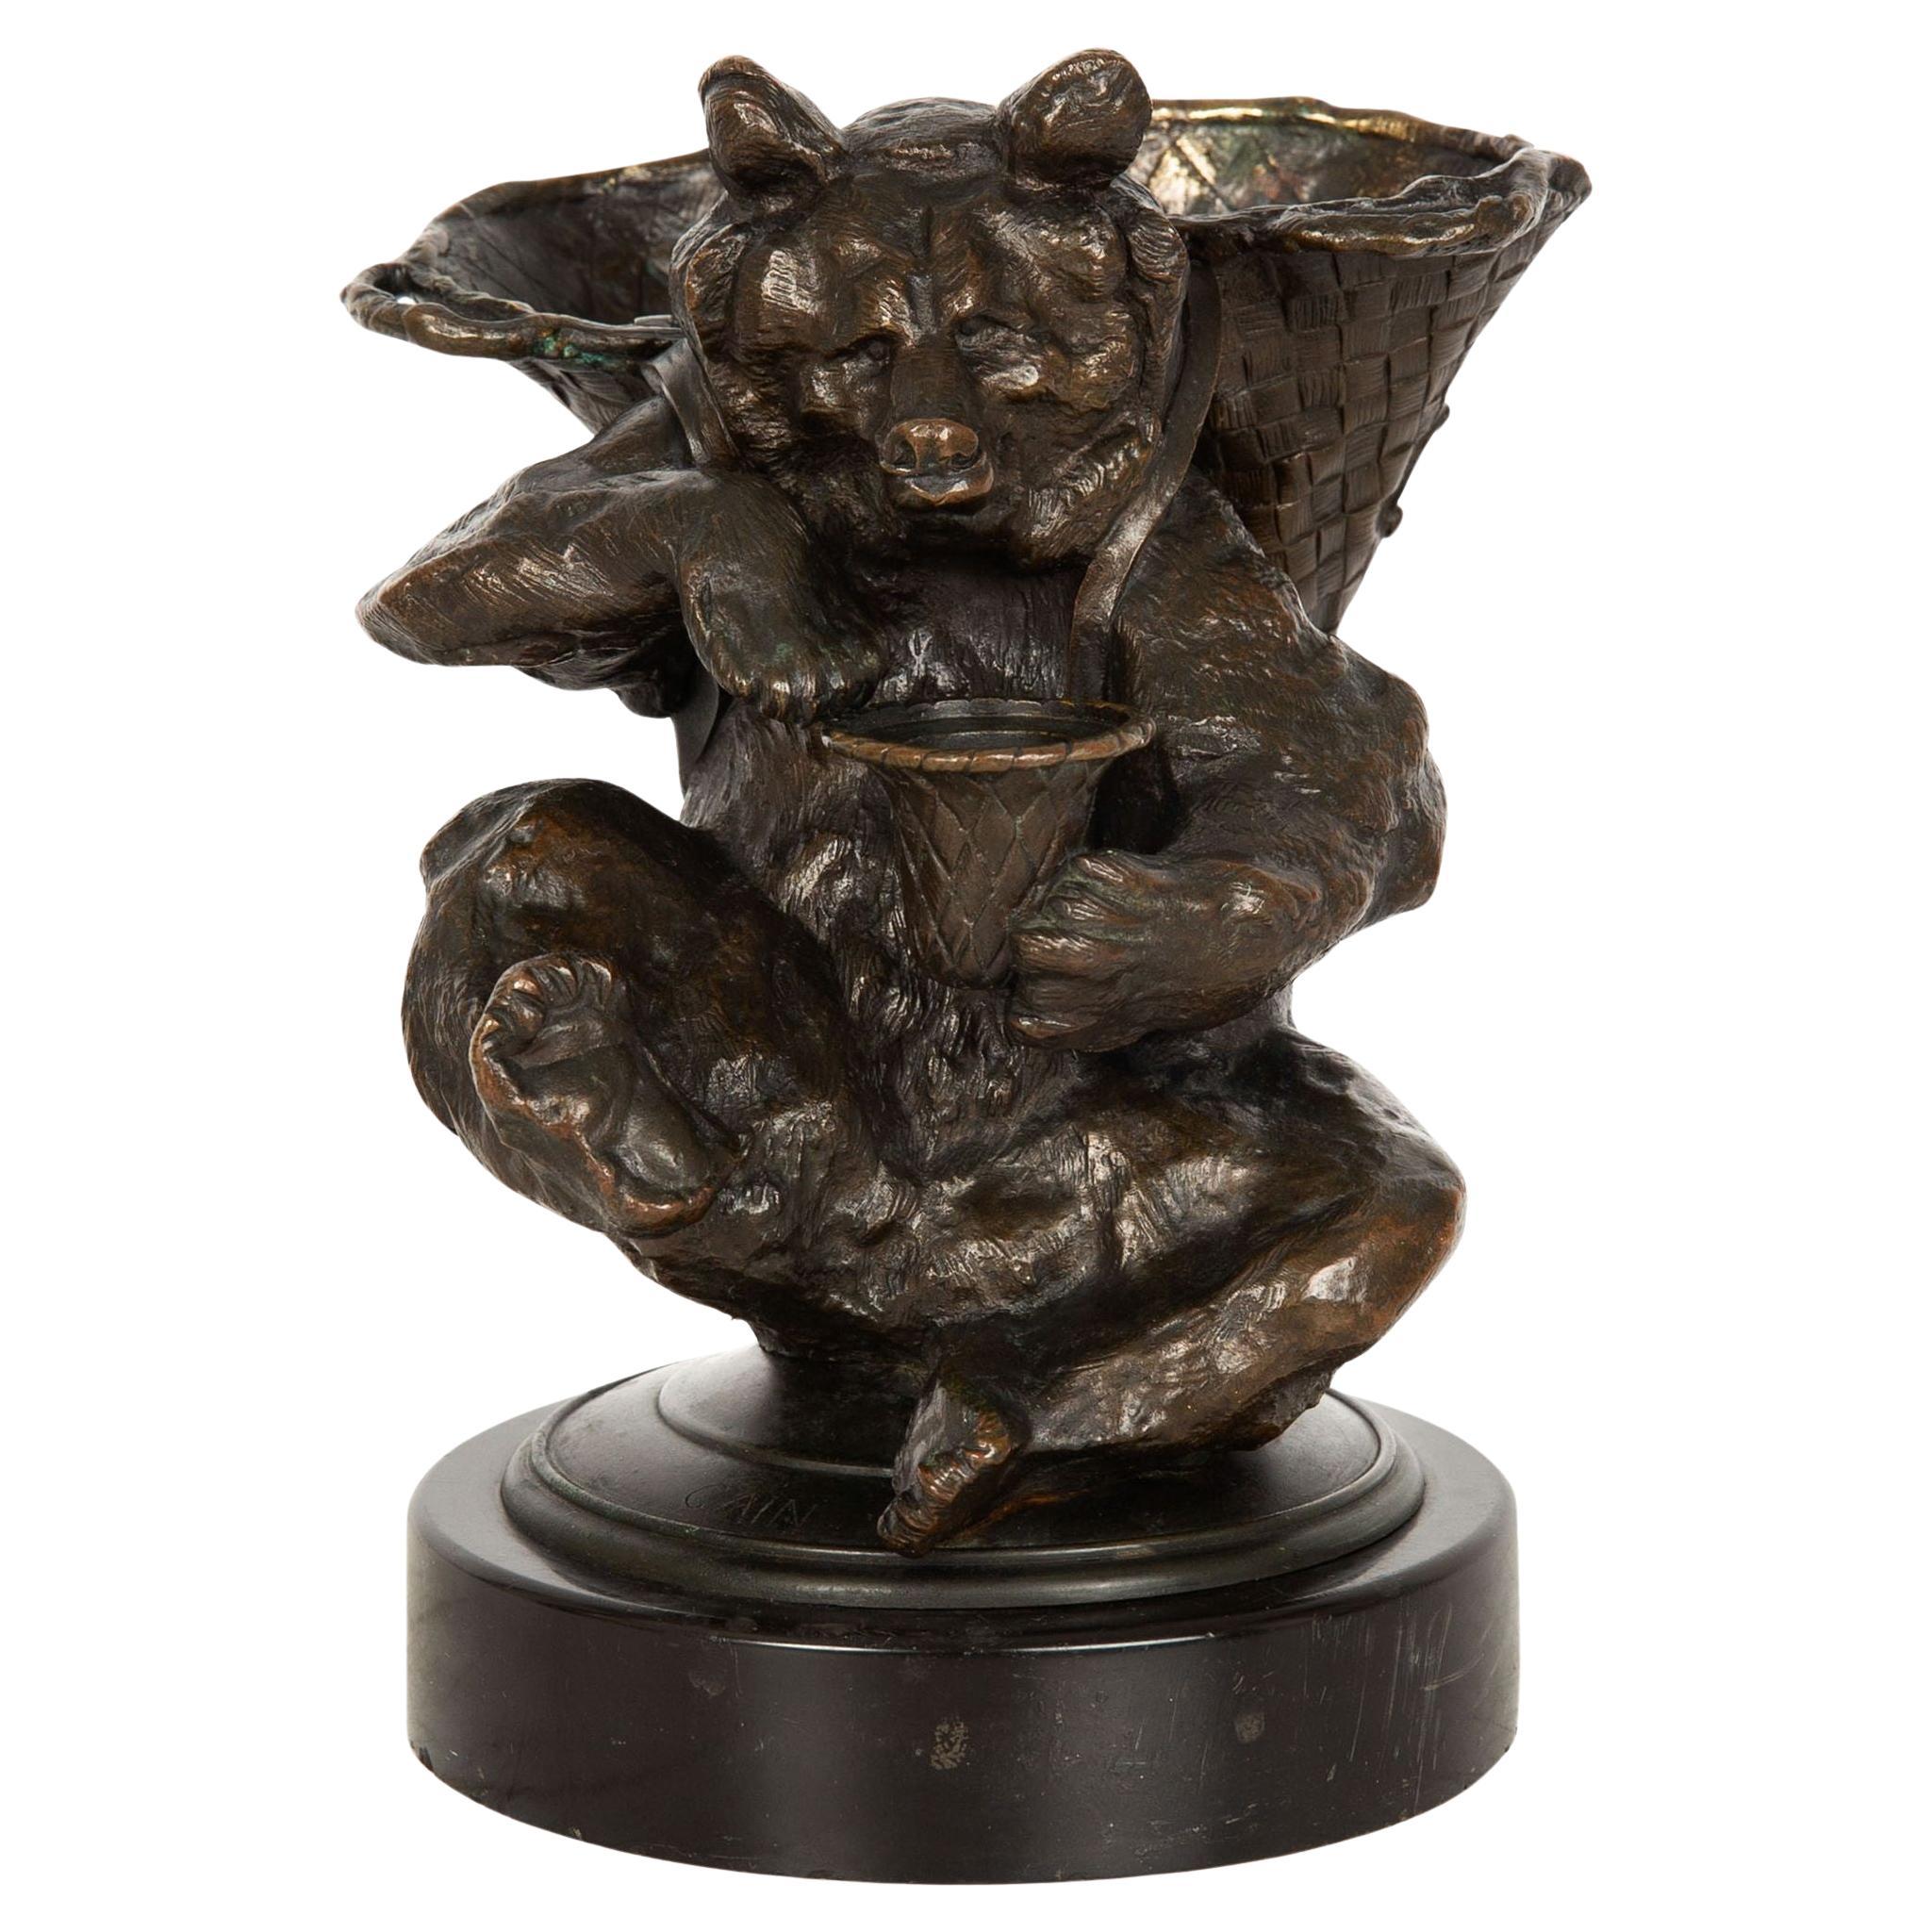 French Bronze Sculpture of Seated Harvester Bear by Auguste Cain